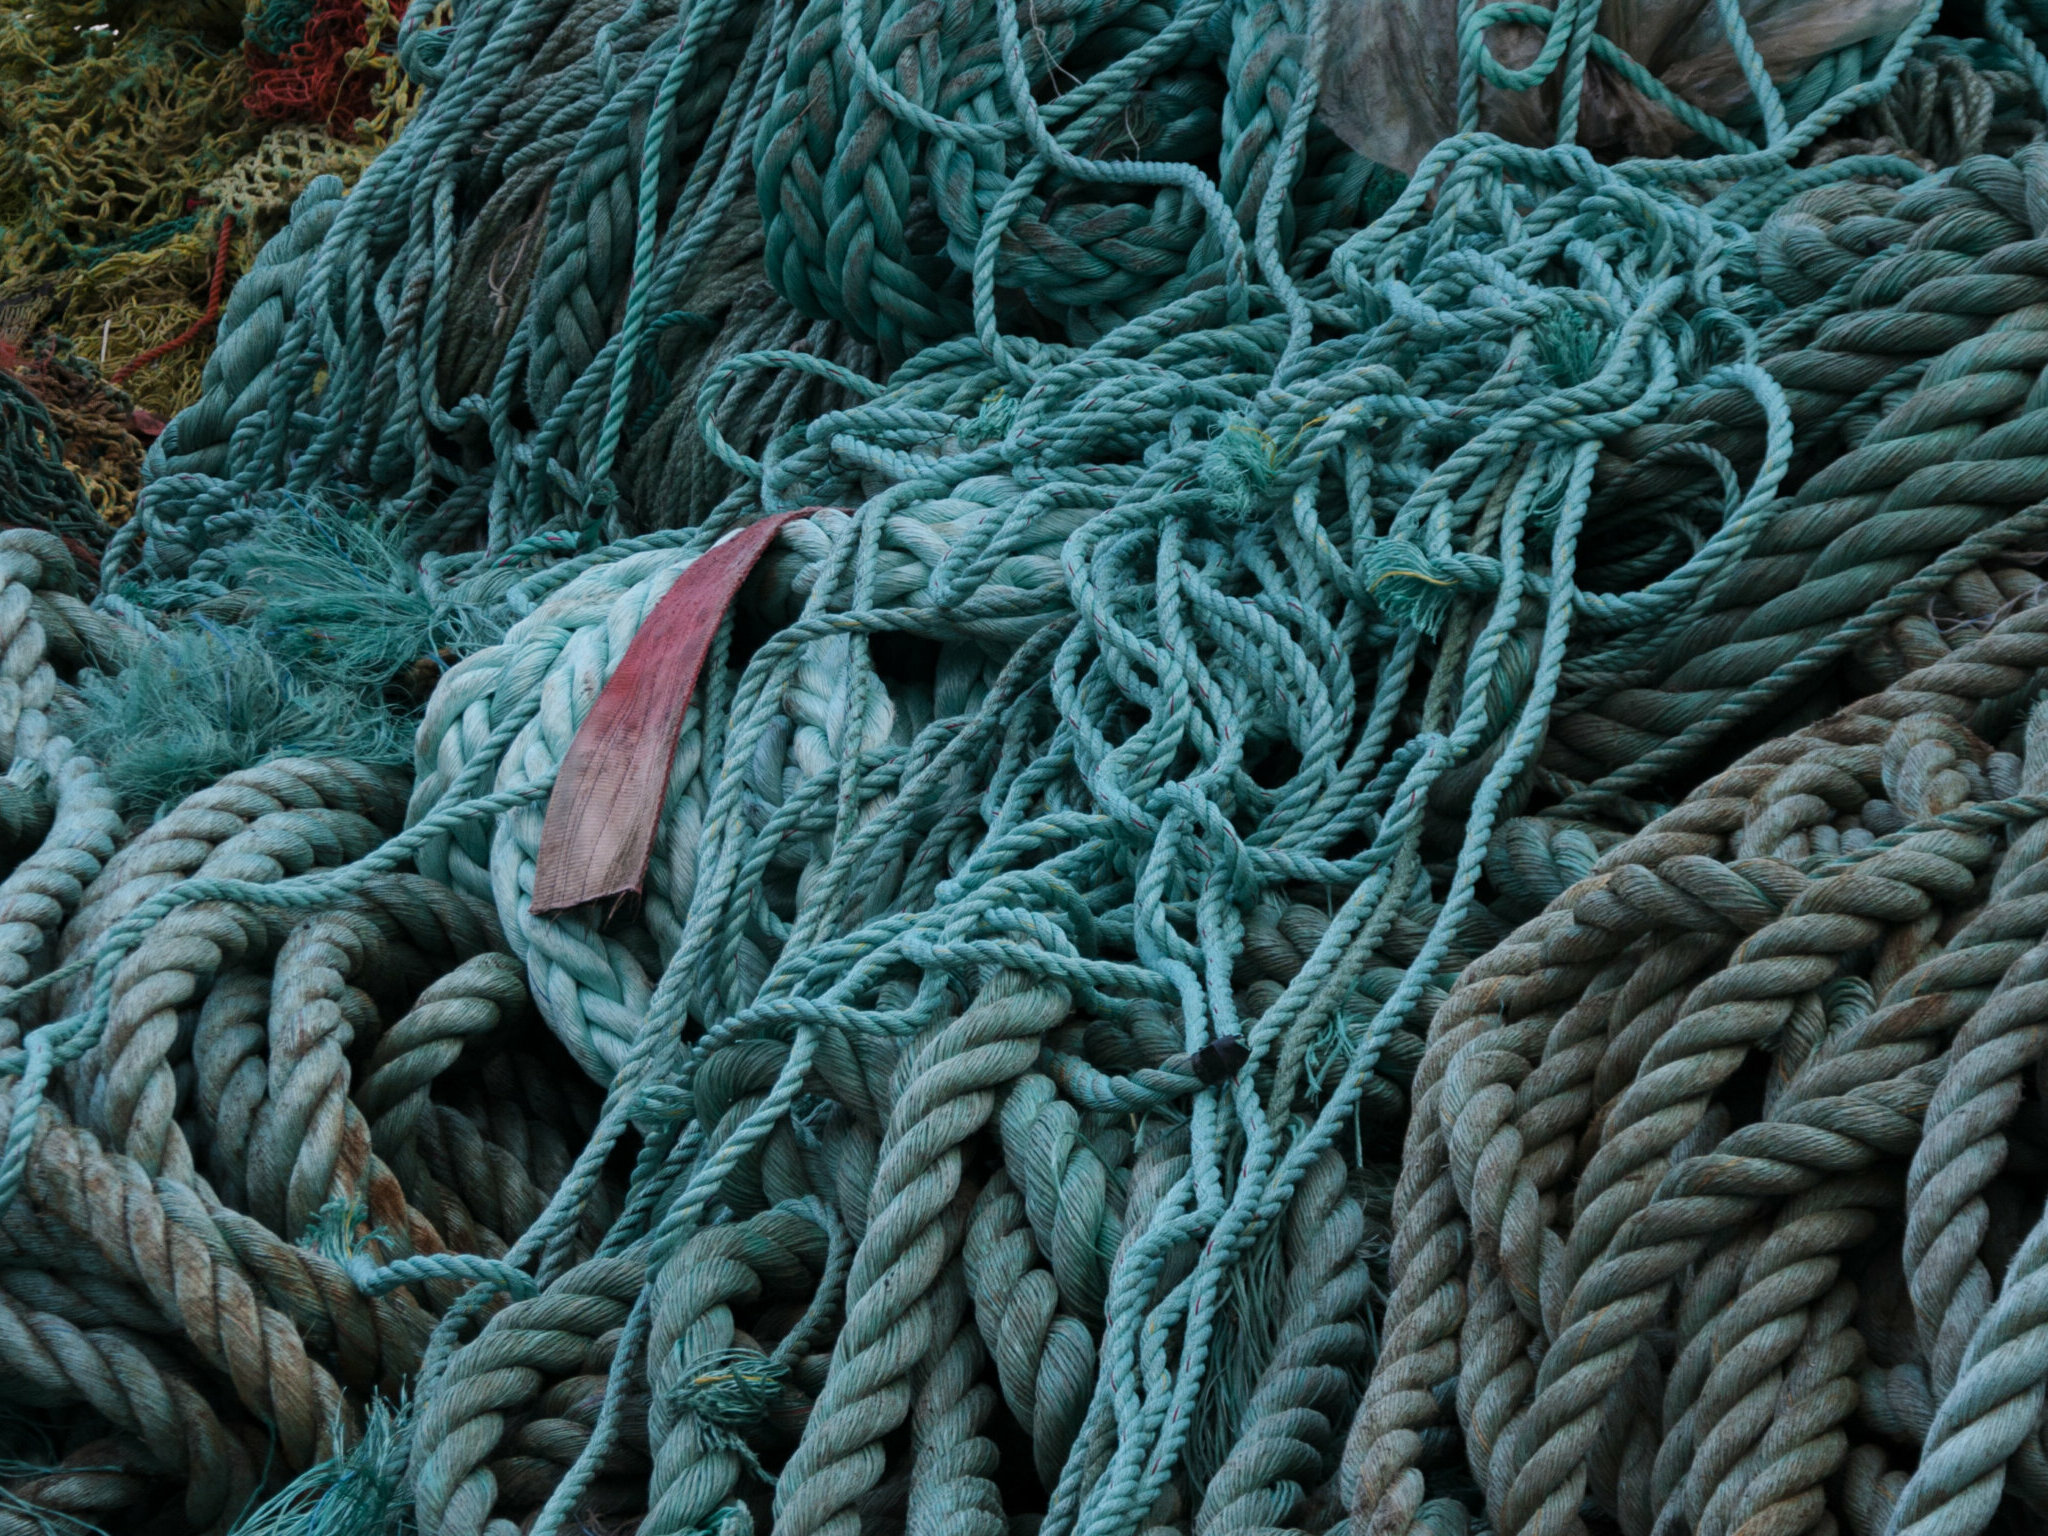 Old discarded trawls